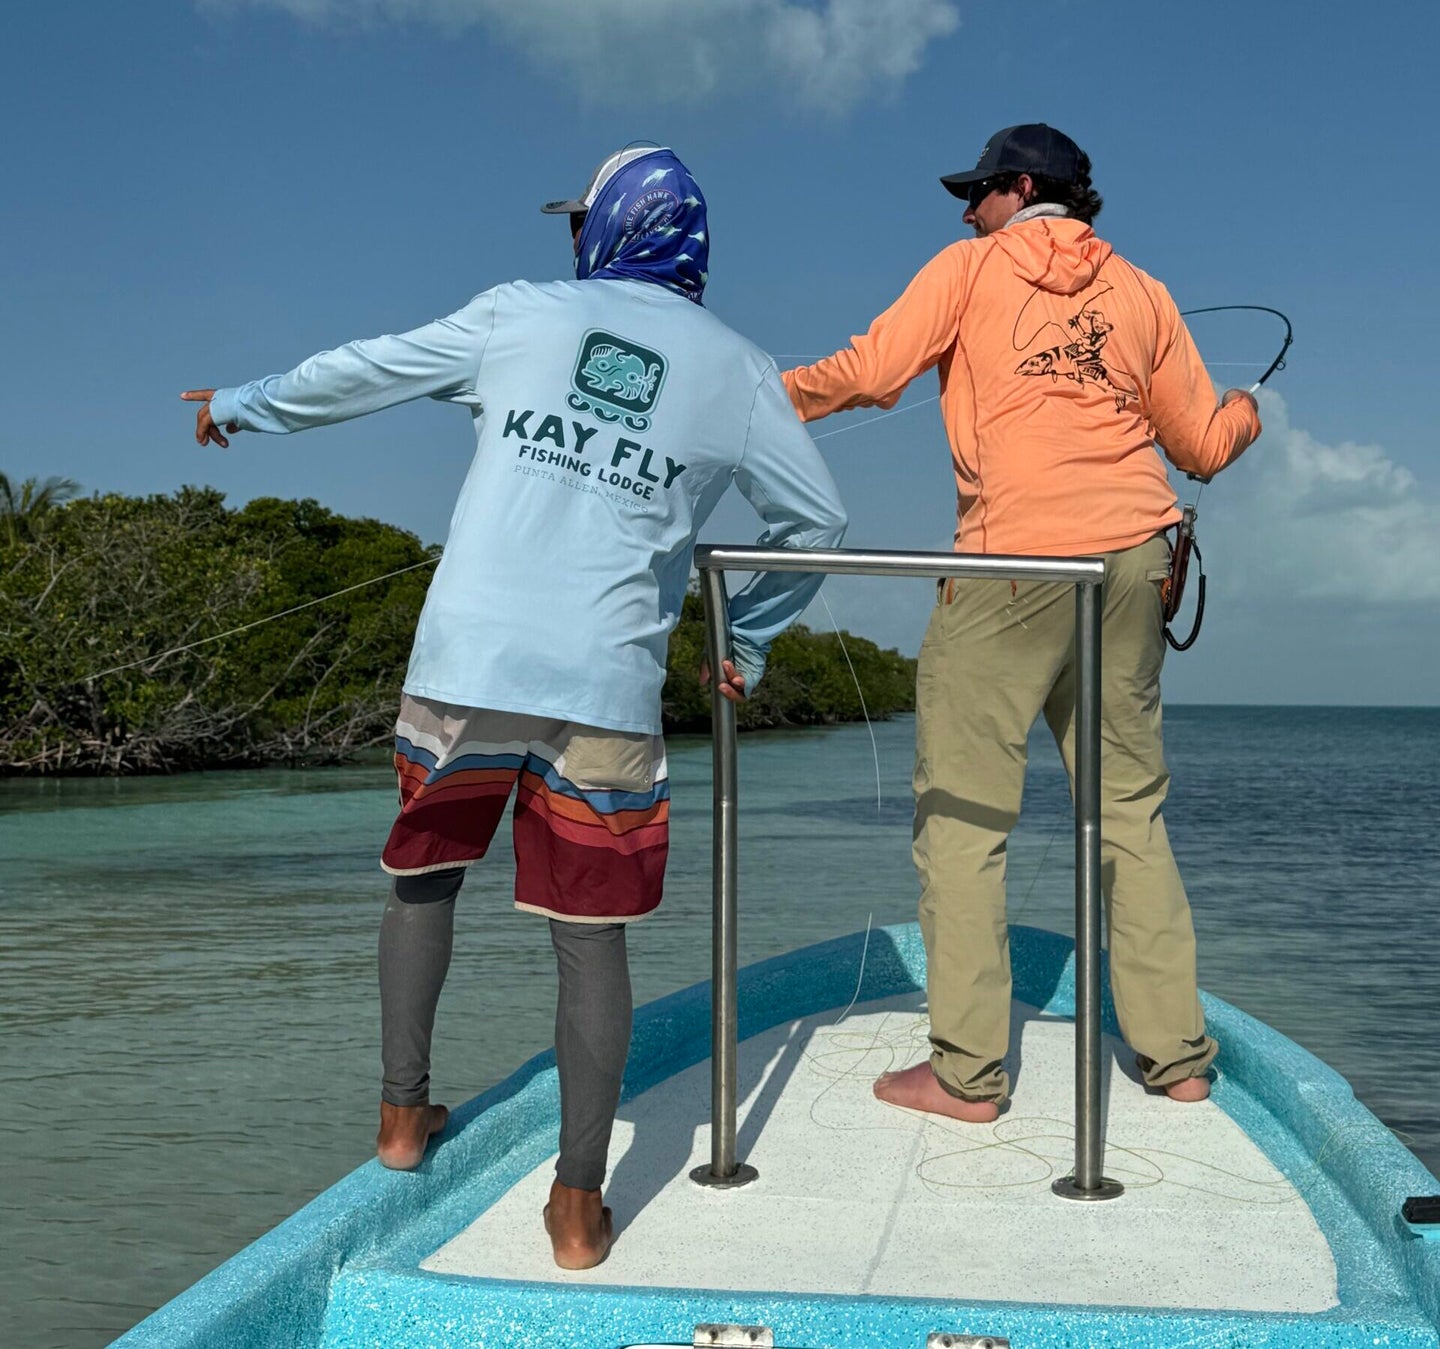 A fly fisherman in an orange shirt stands next to a fishing guide in a blue shirt on a skiff.